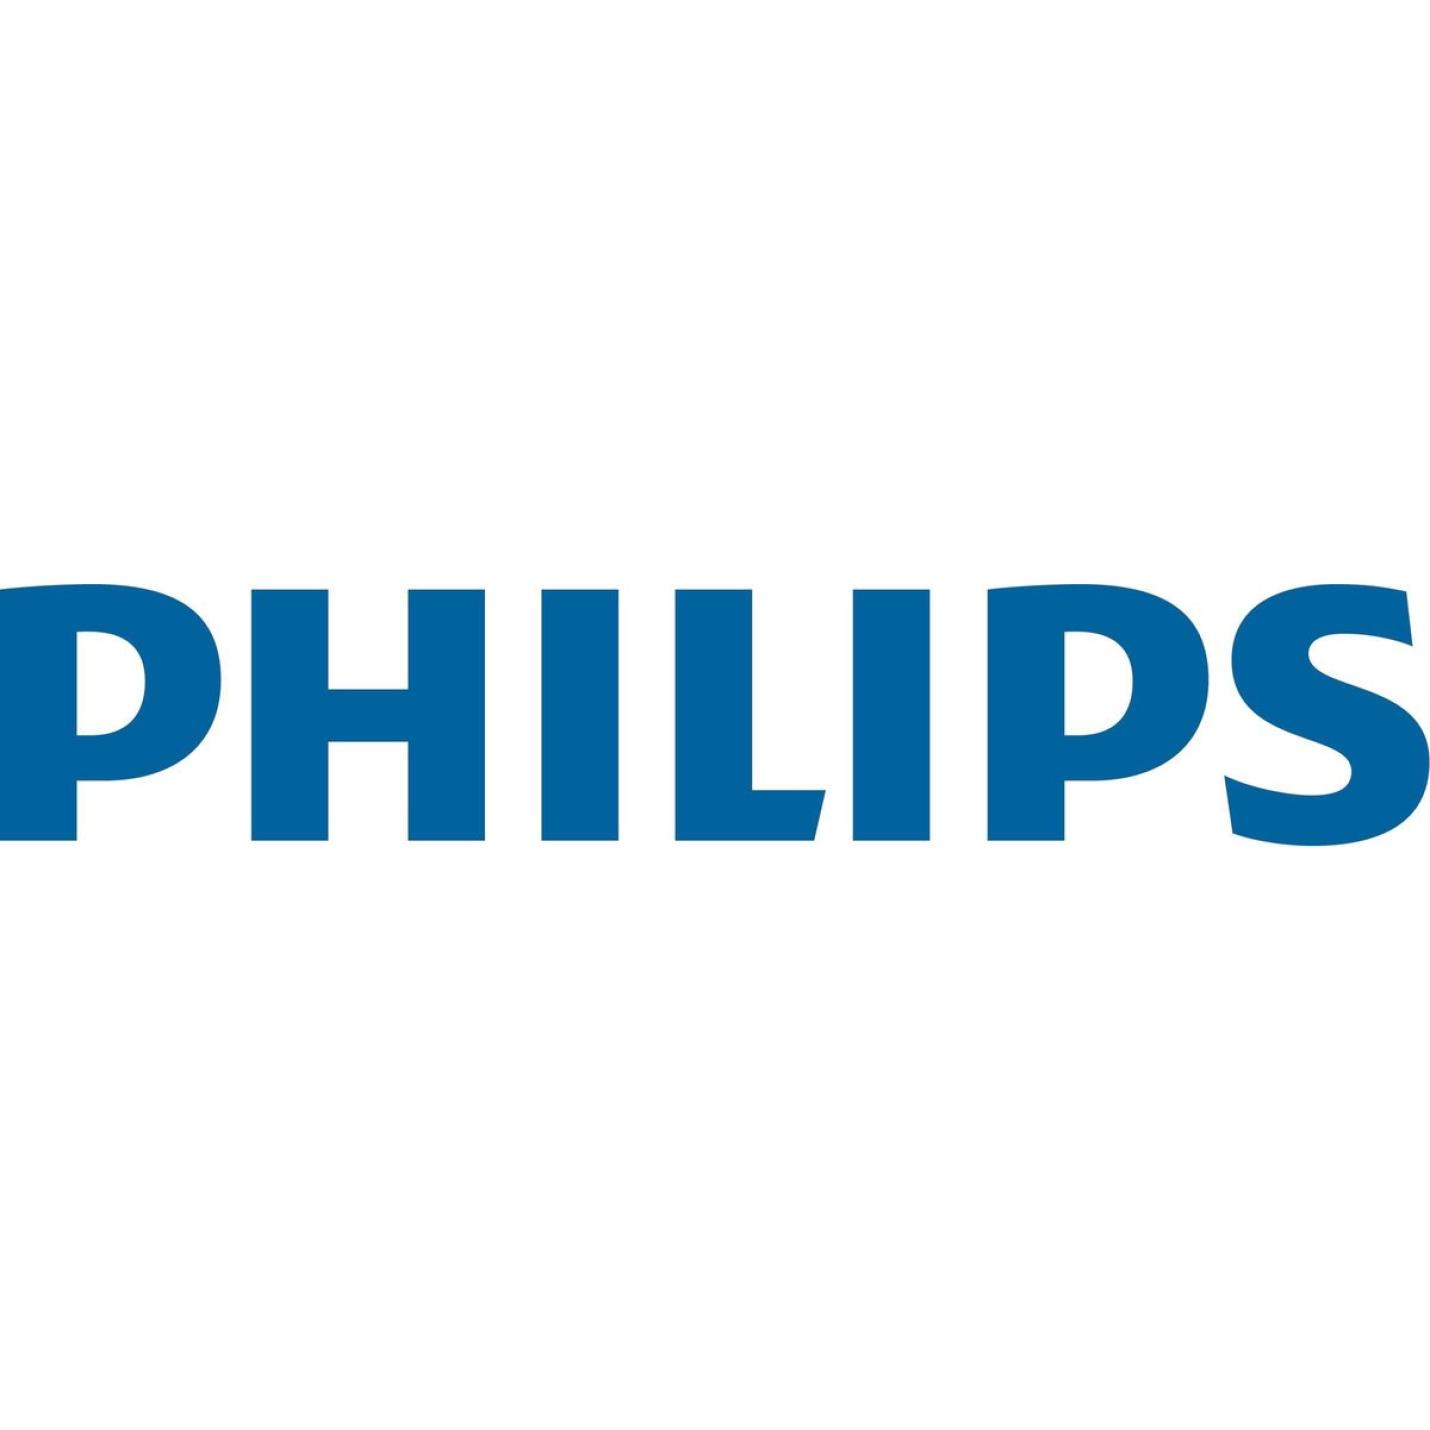 Philips Viva Collection Extra brede broodrooster met 2 sleuven, broodrooster 3